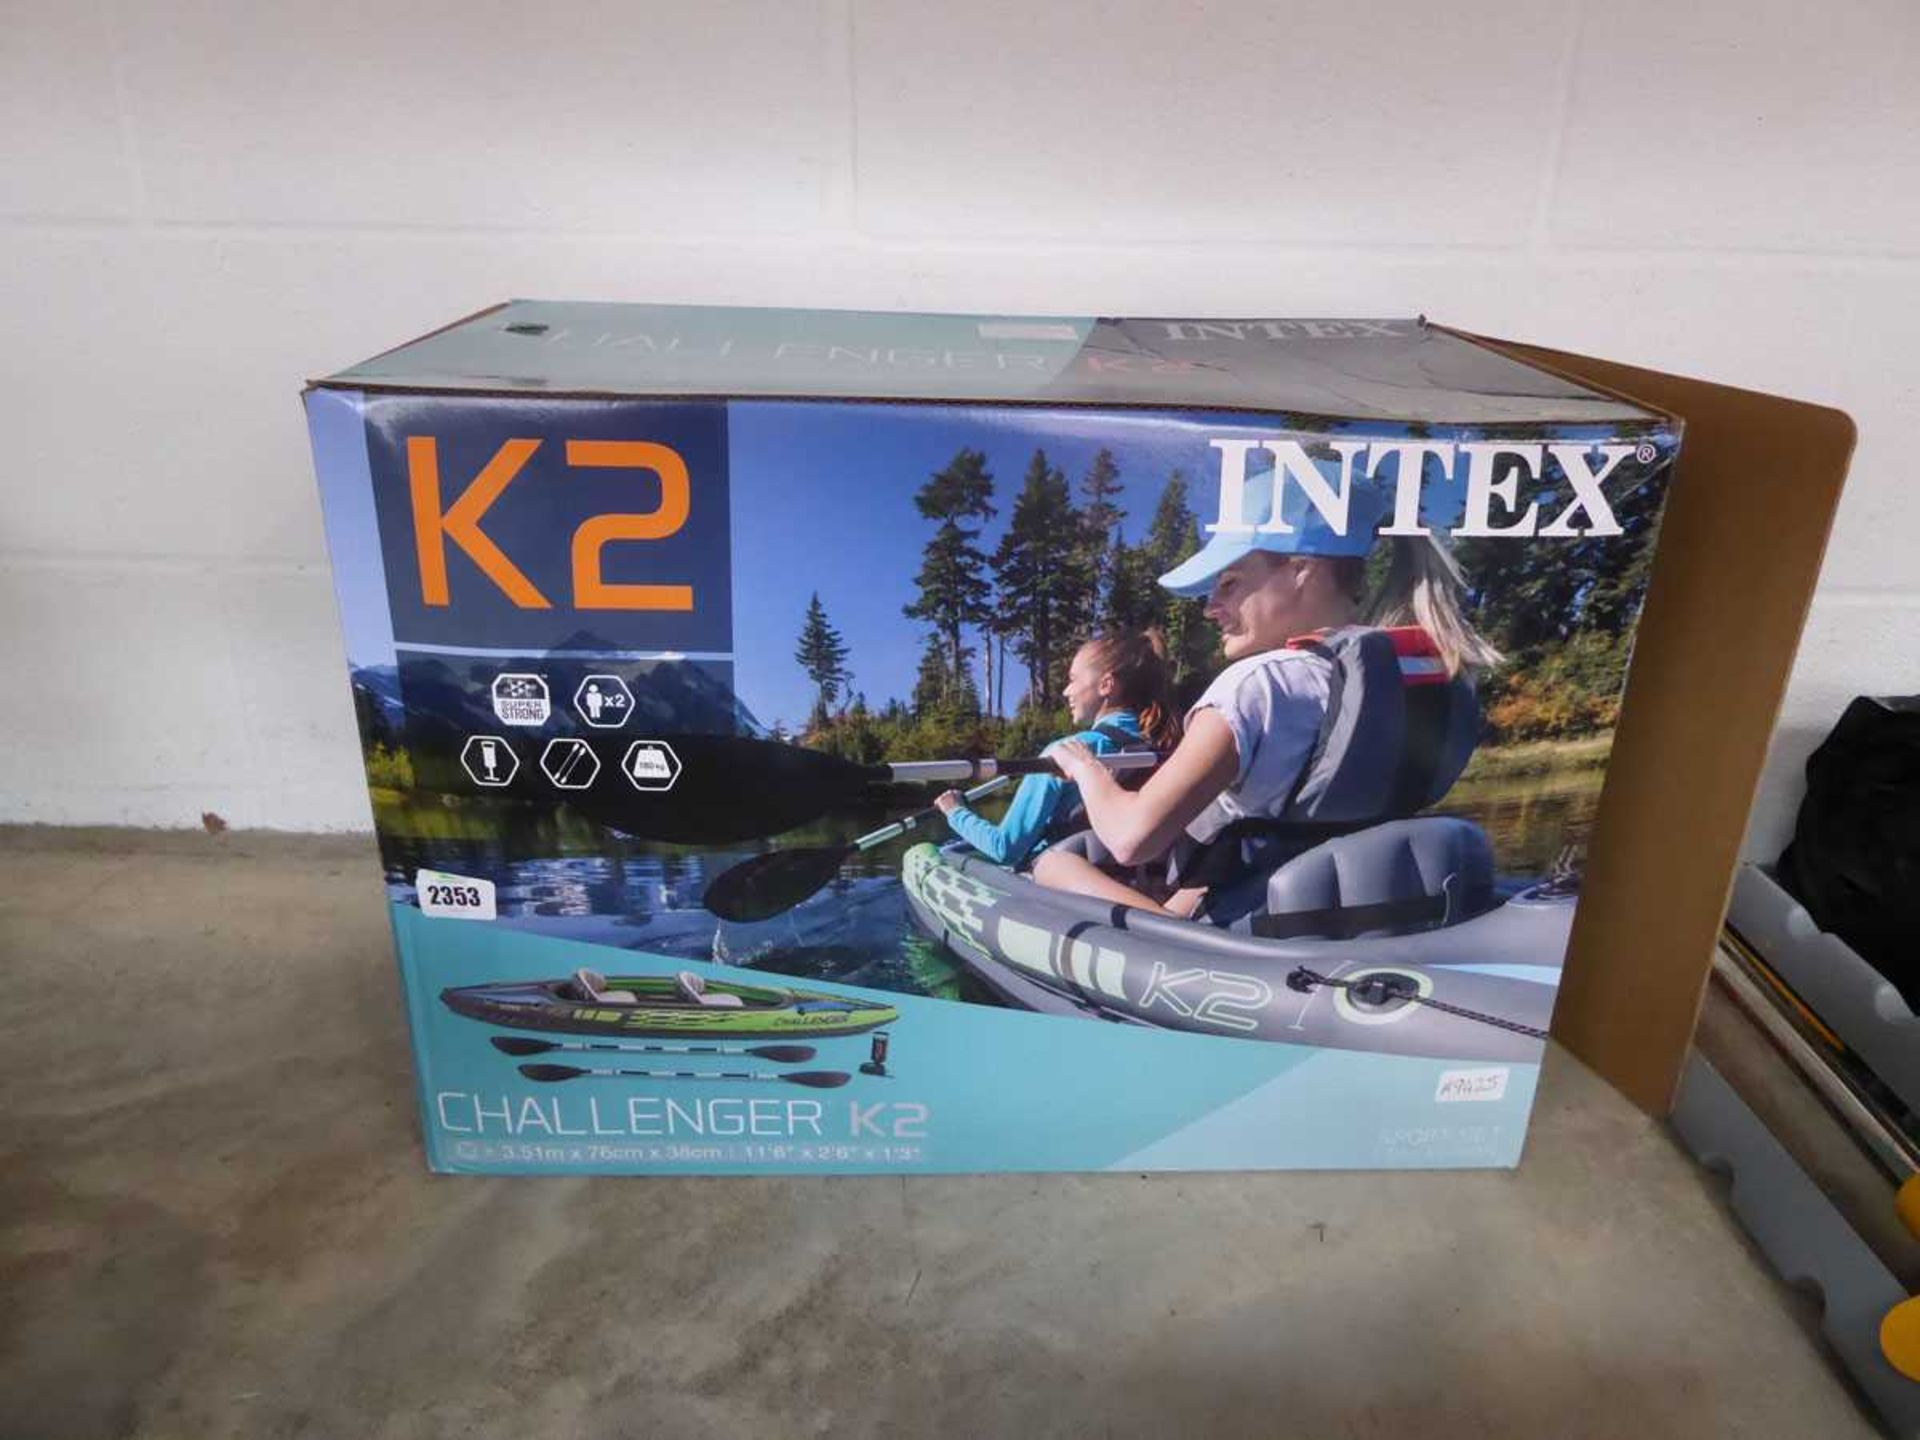 Boxed Challenger K2 inflatable kayak